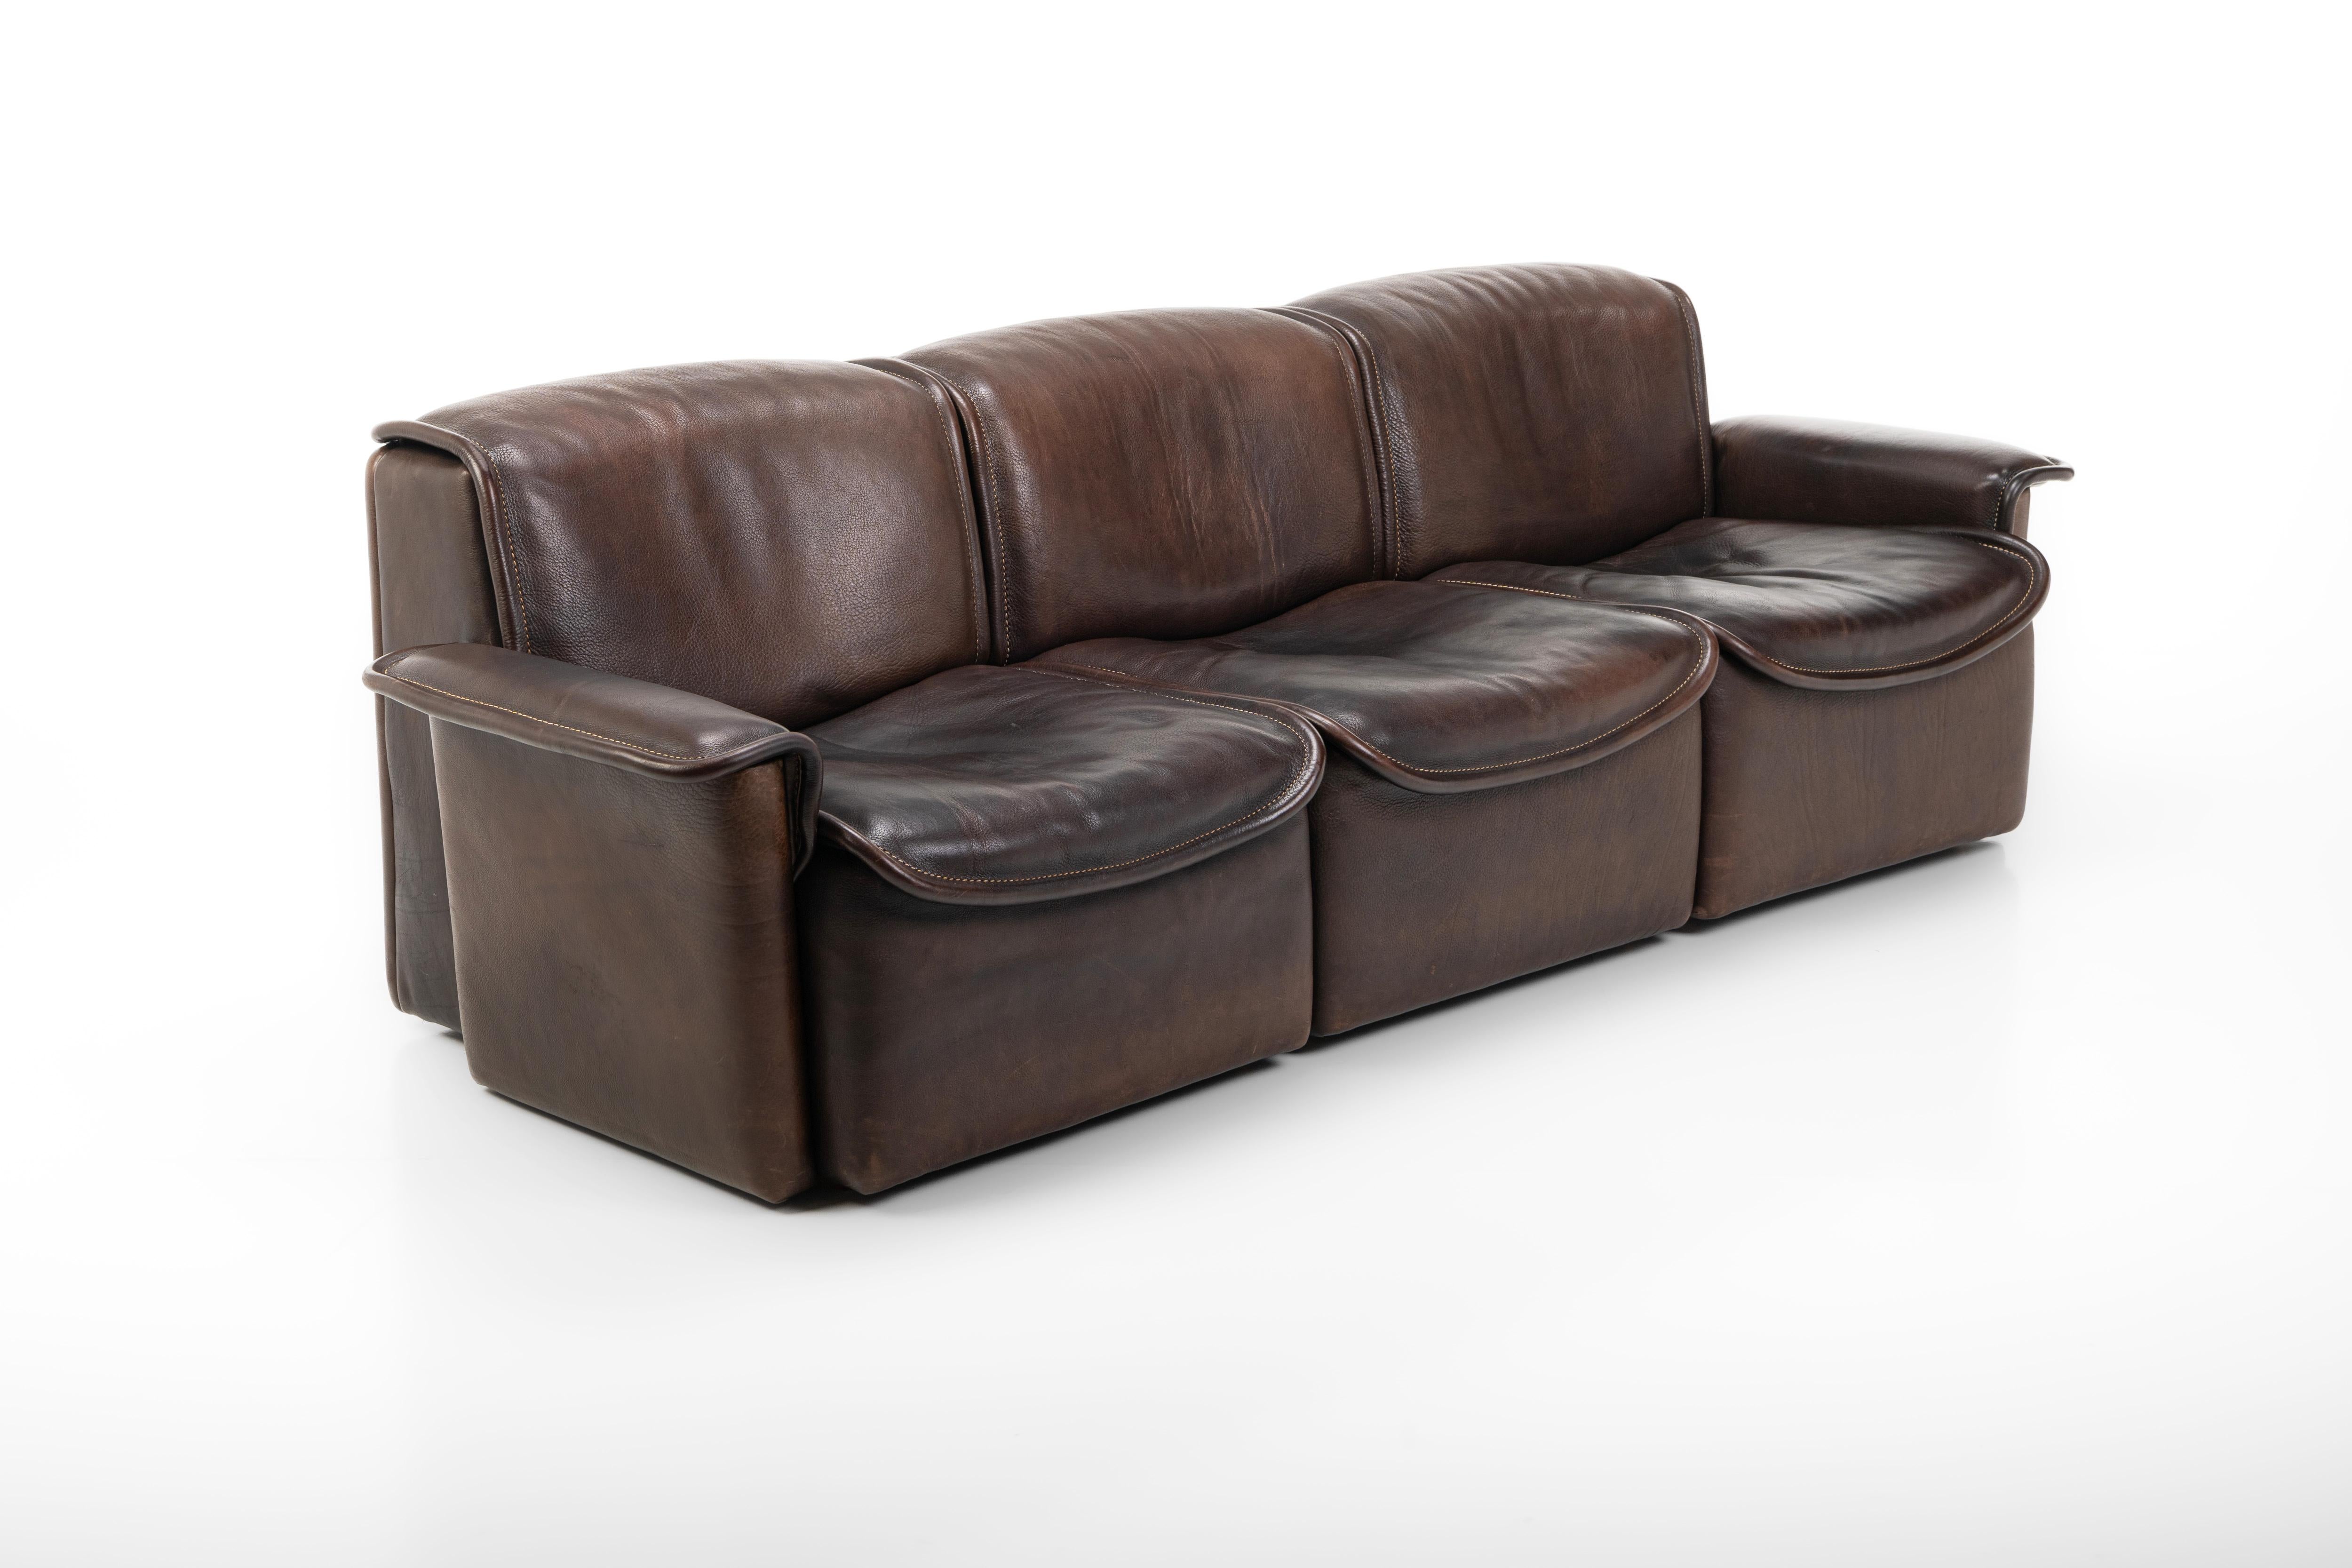 This exquisite vintage sofa, upholstered in dark brown buffalo neck leather, presents the DS12 model from the 1970s, crafted by the Swiss design collective Team De Sede. A set of two lounge chairs is also available

Dimensions:
W: 223 cm
D: 83 cm
H: